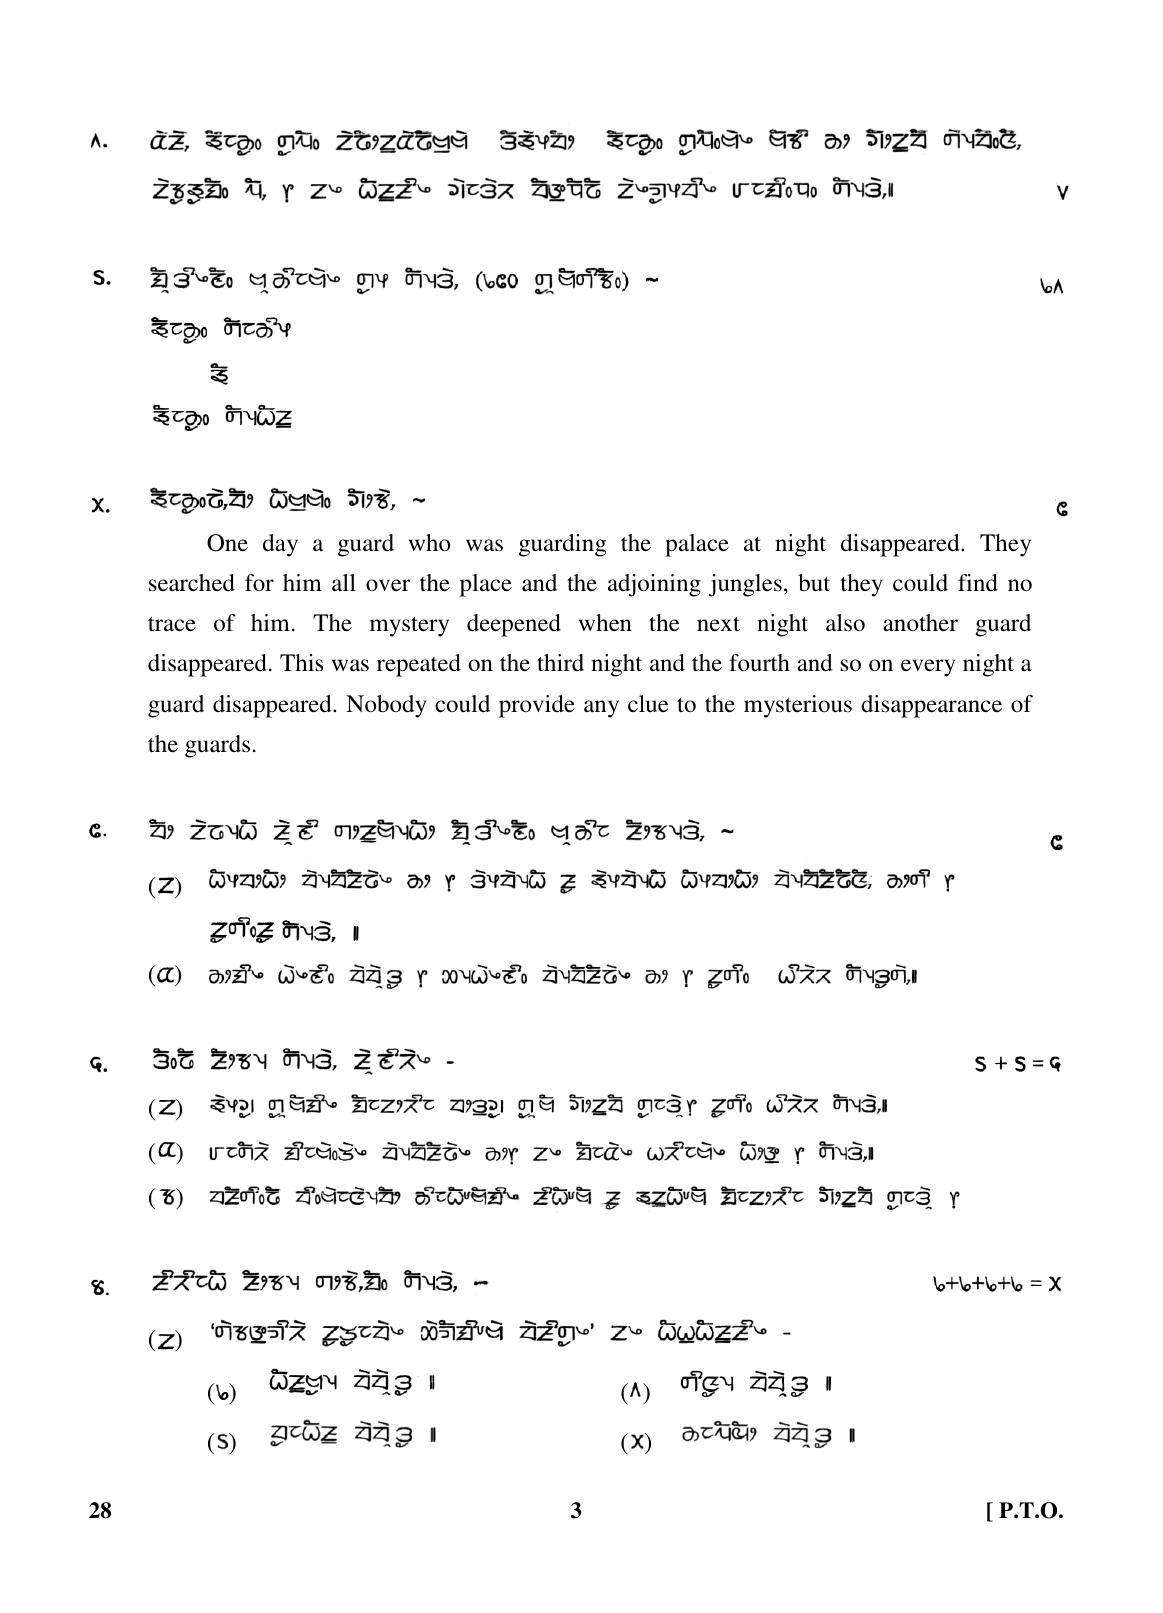 CBSE Class 10 28 (Limboo) 2018 Question Paper - Page 3